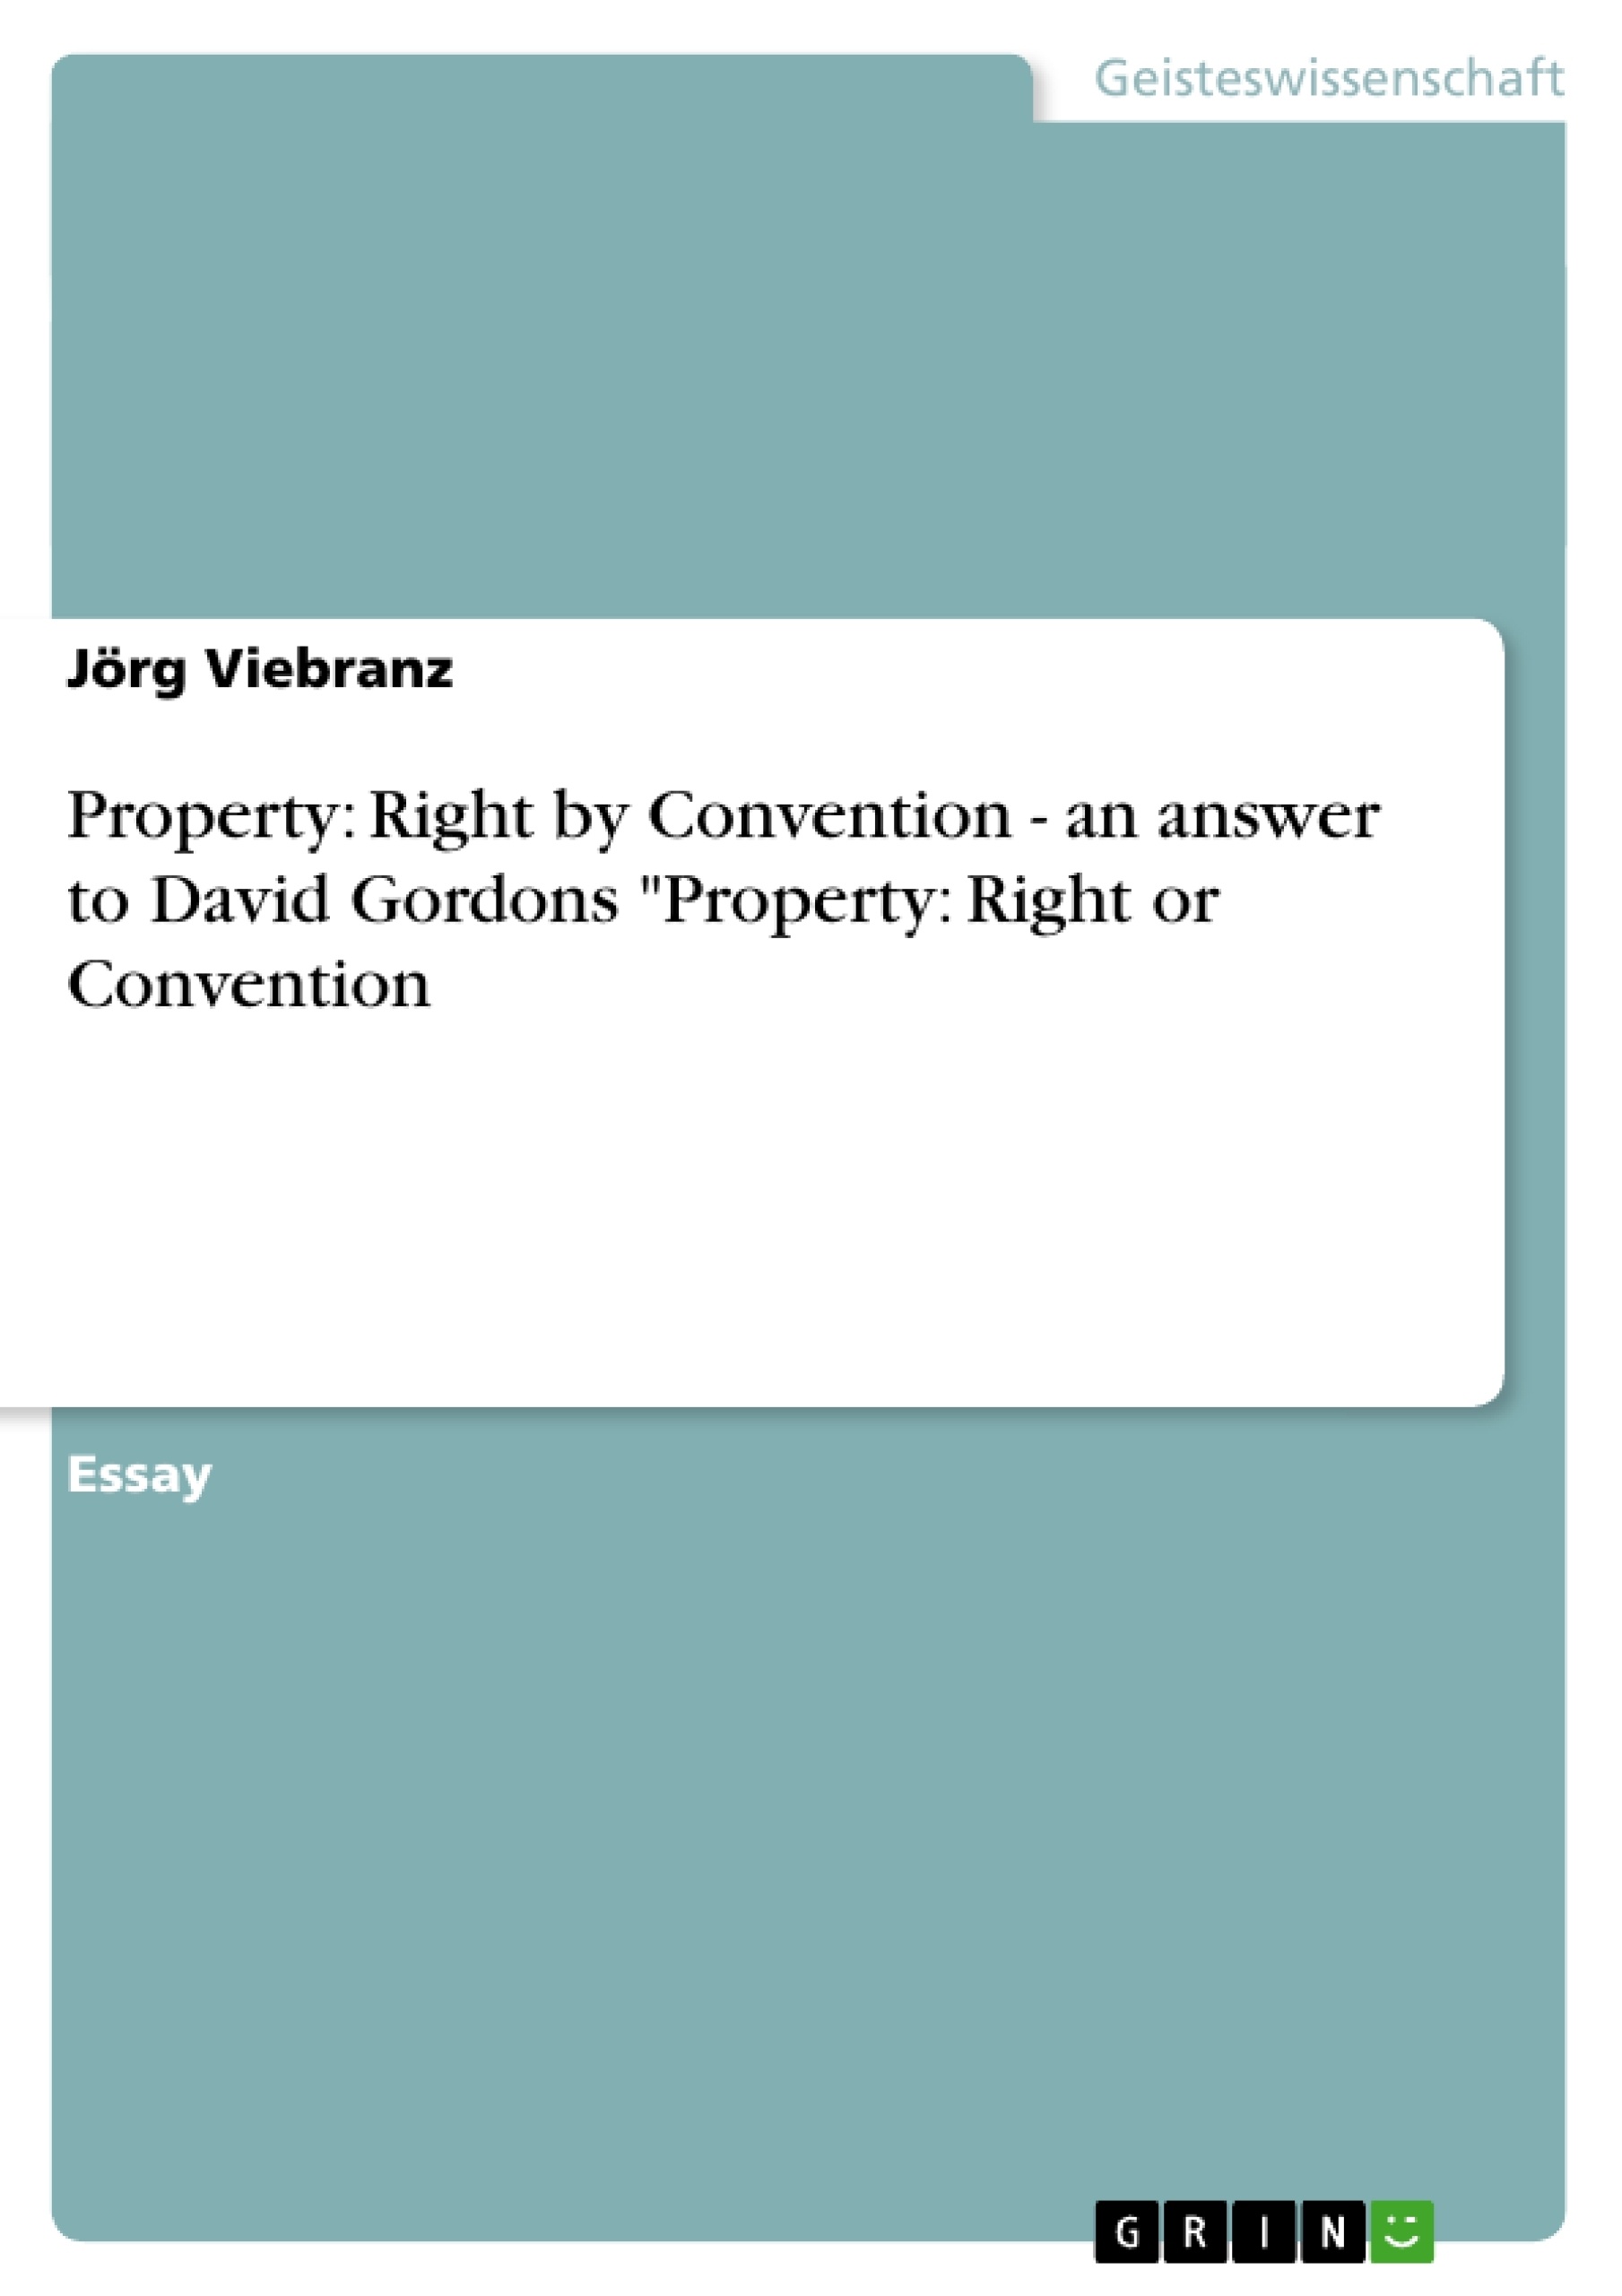 Titel: Property: Right by Convention - an answer to David Gordons "Property: Right or Convention